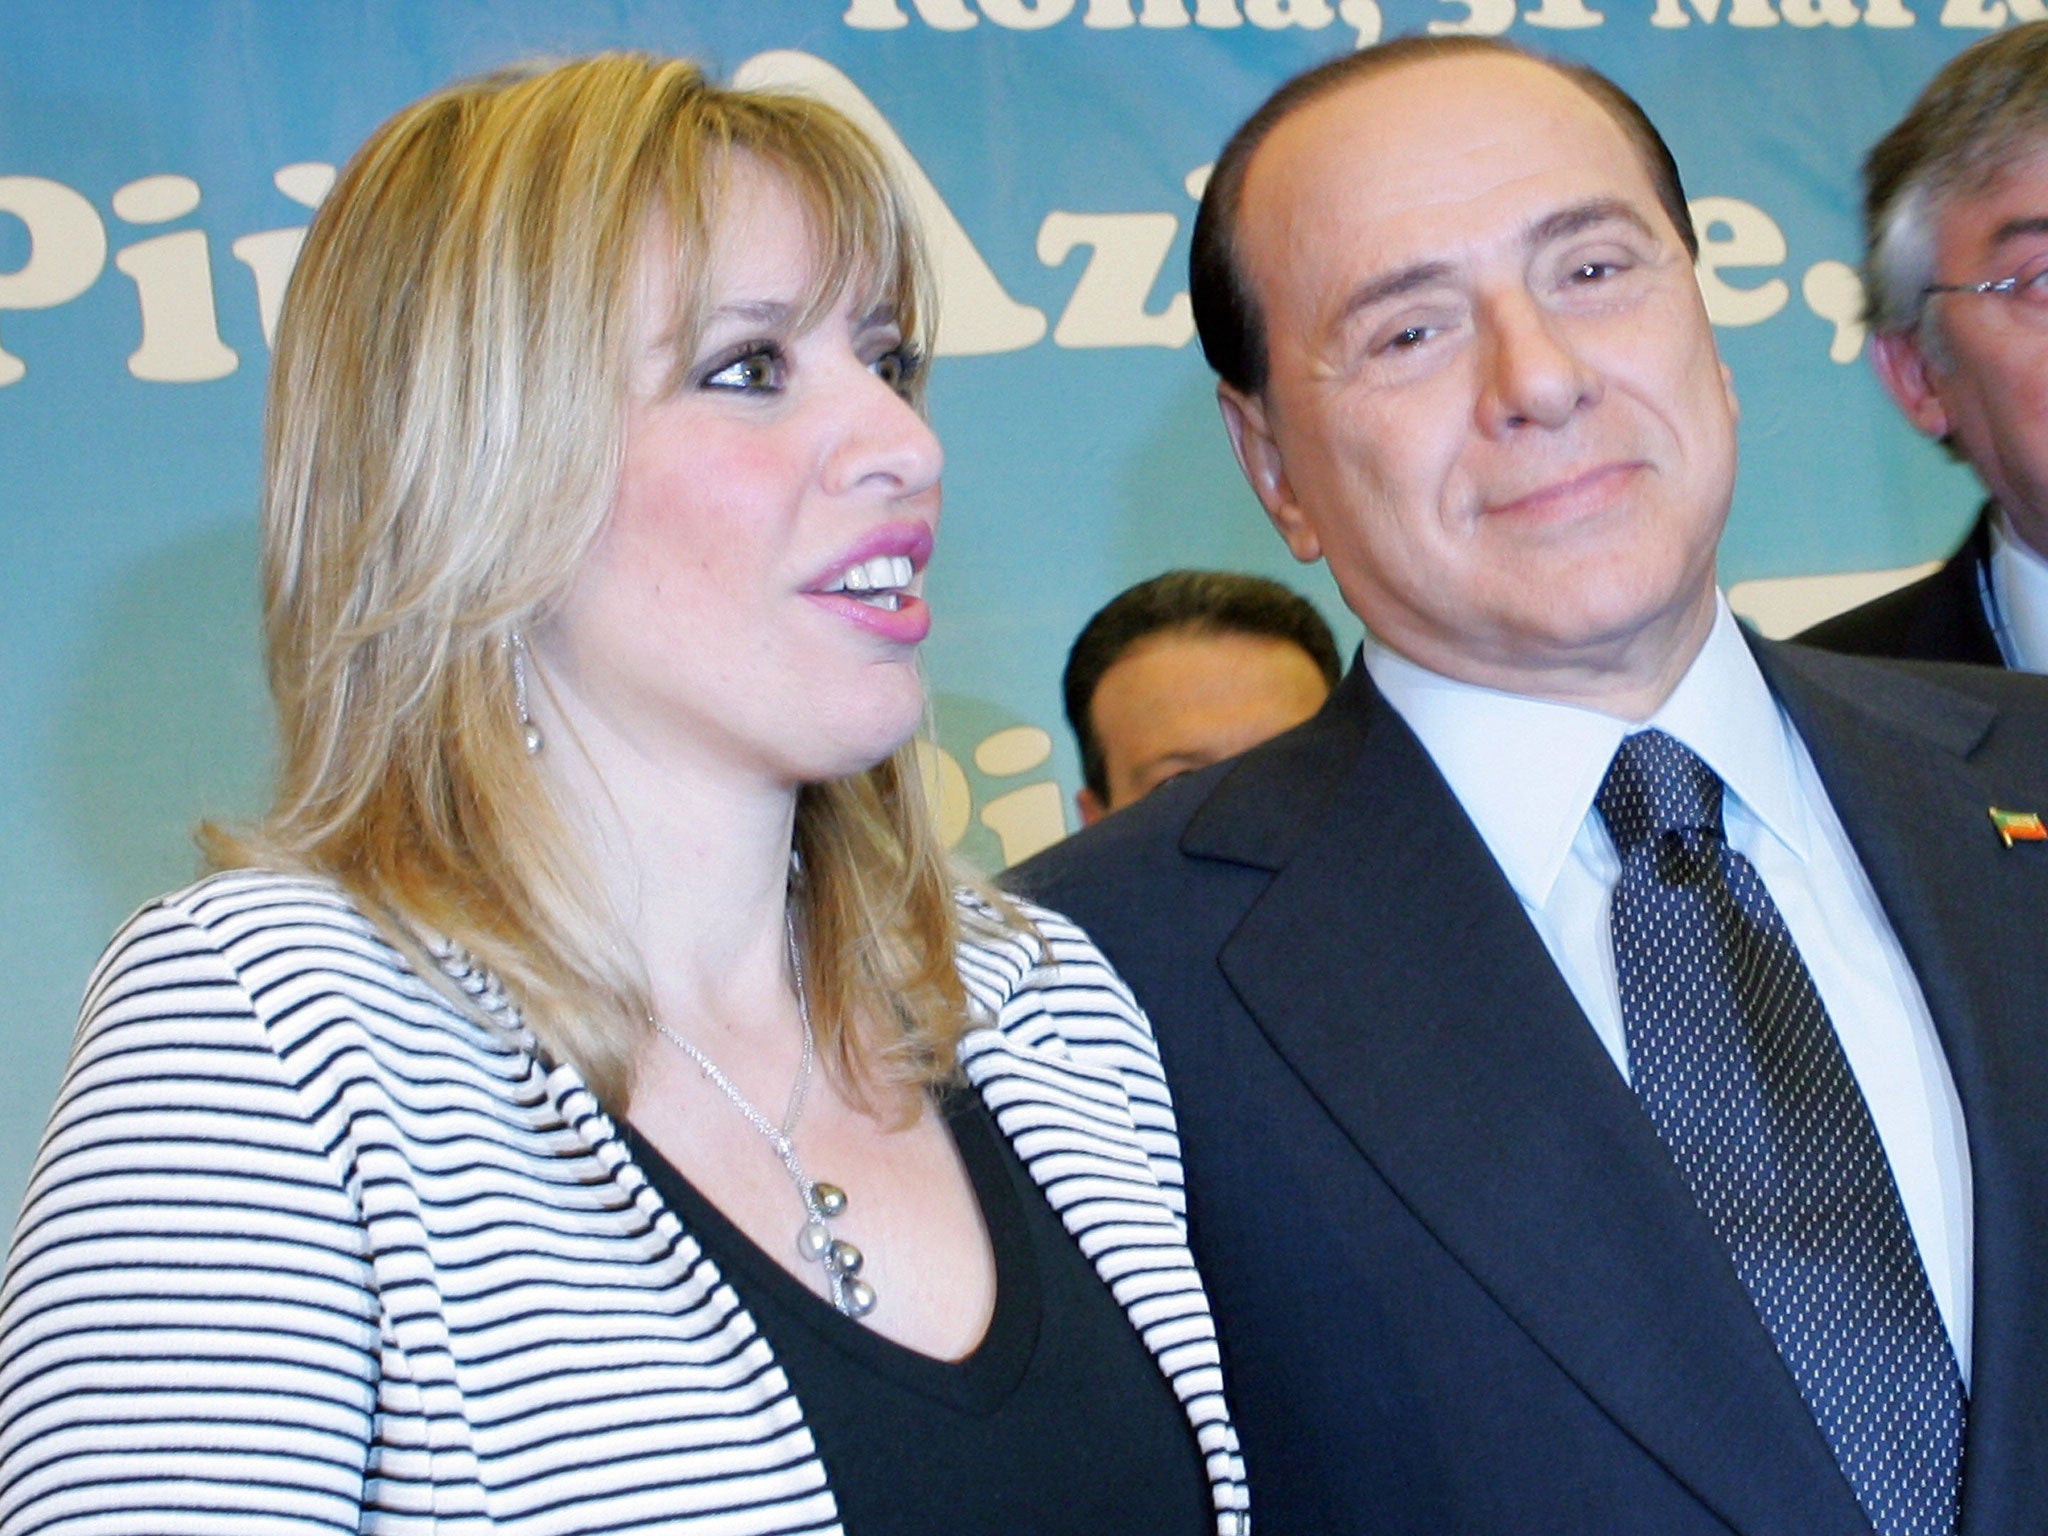 Alessandra Mussolini MP, pictured here in 2007 with Silvio Berlusconi, whose Forza Italia party she would later join